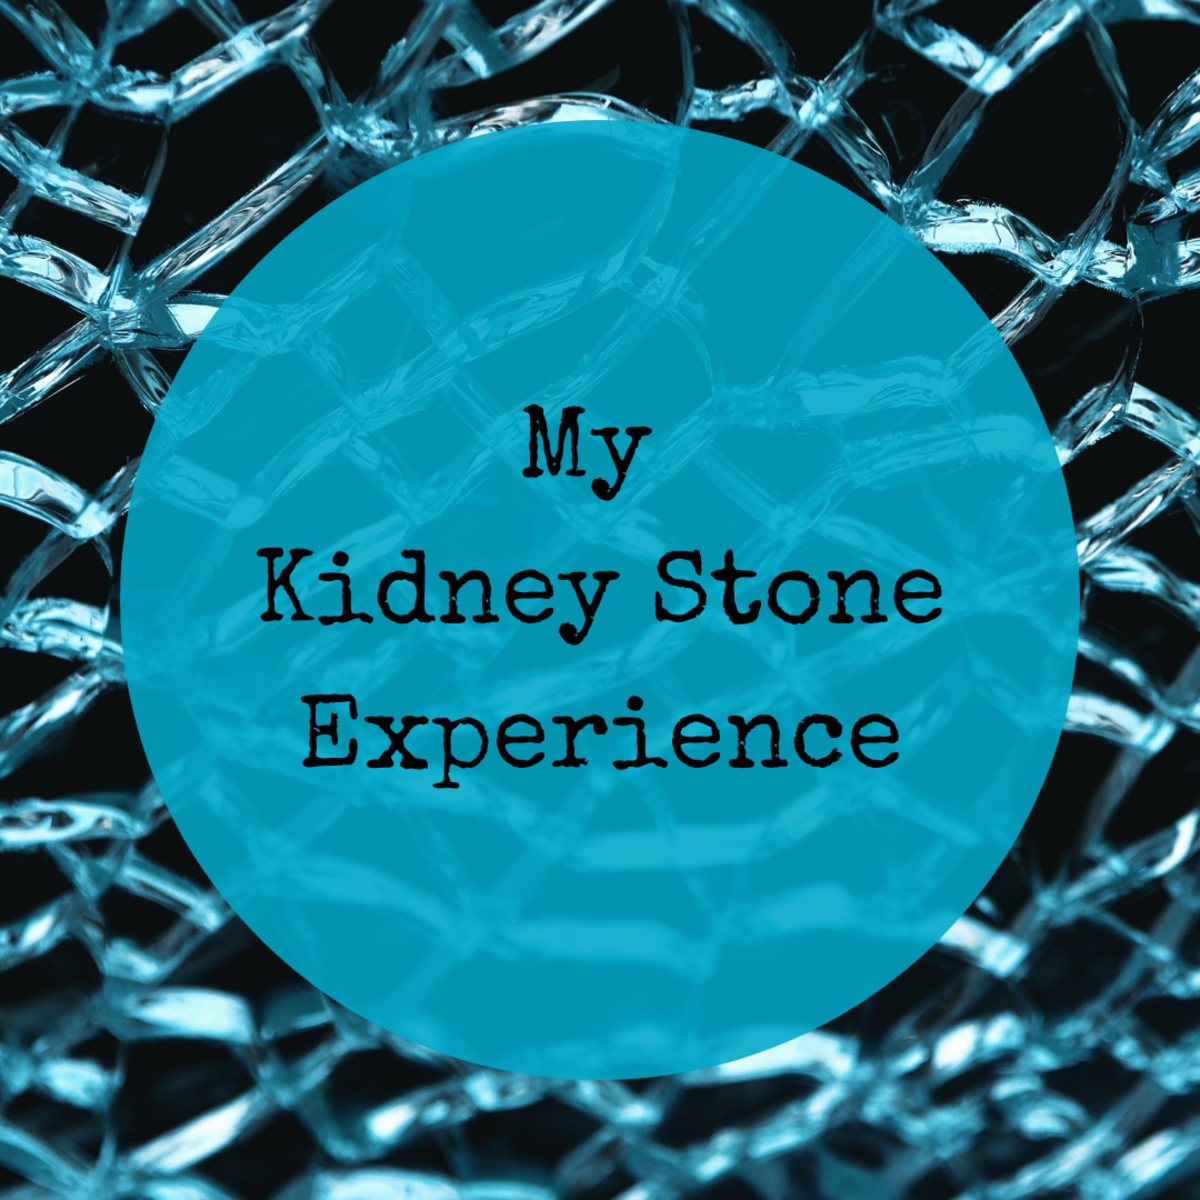 How to Recognize Early Symptoms of Kidney Stones: My Story